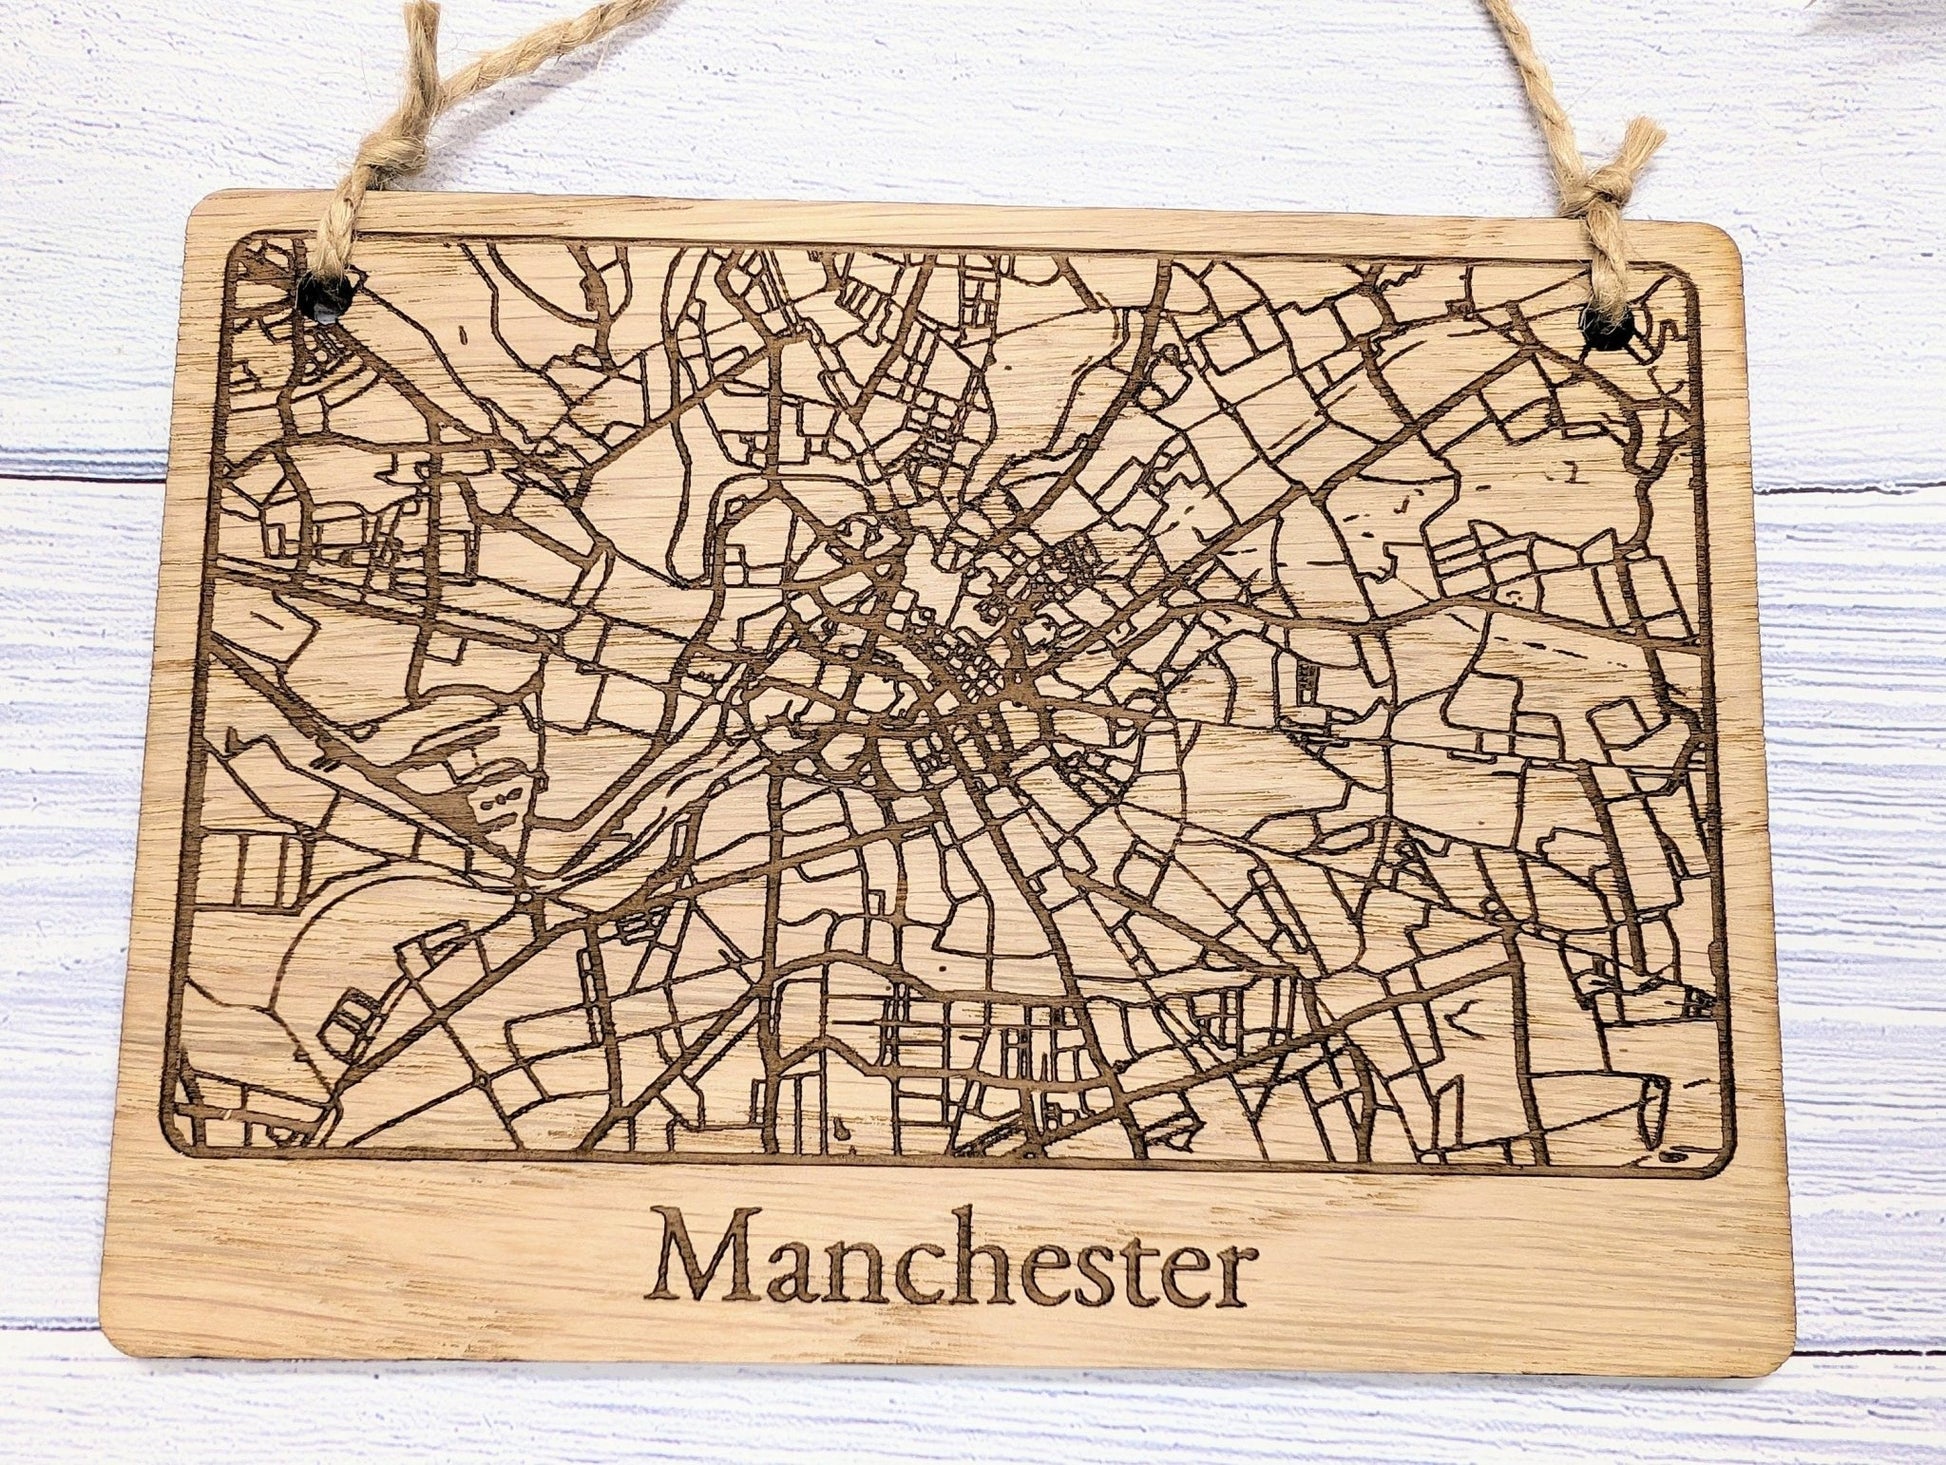 Handcrafted Wooden Map Wall Art of Manchester, UK - Available in 4 Sizes - Perfect Home Decor or Unique Gift - CherryGroveCraft